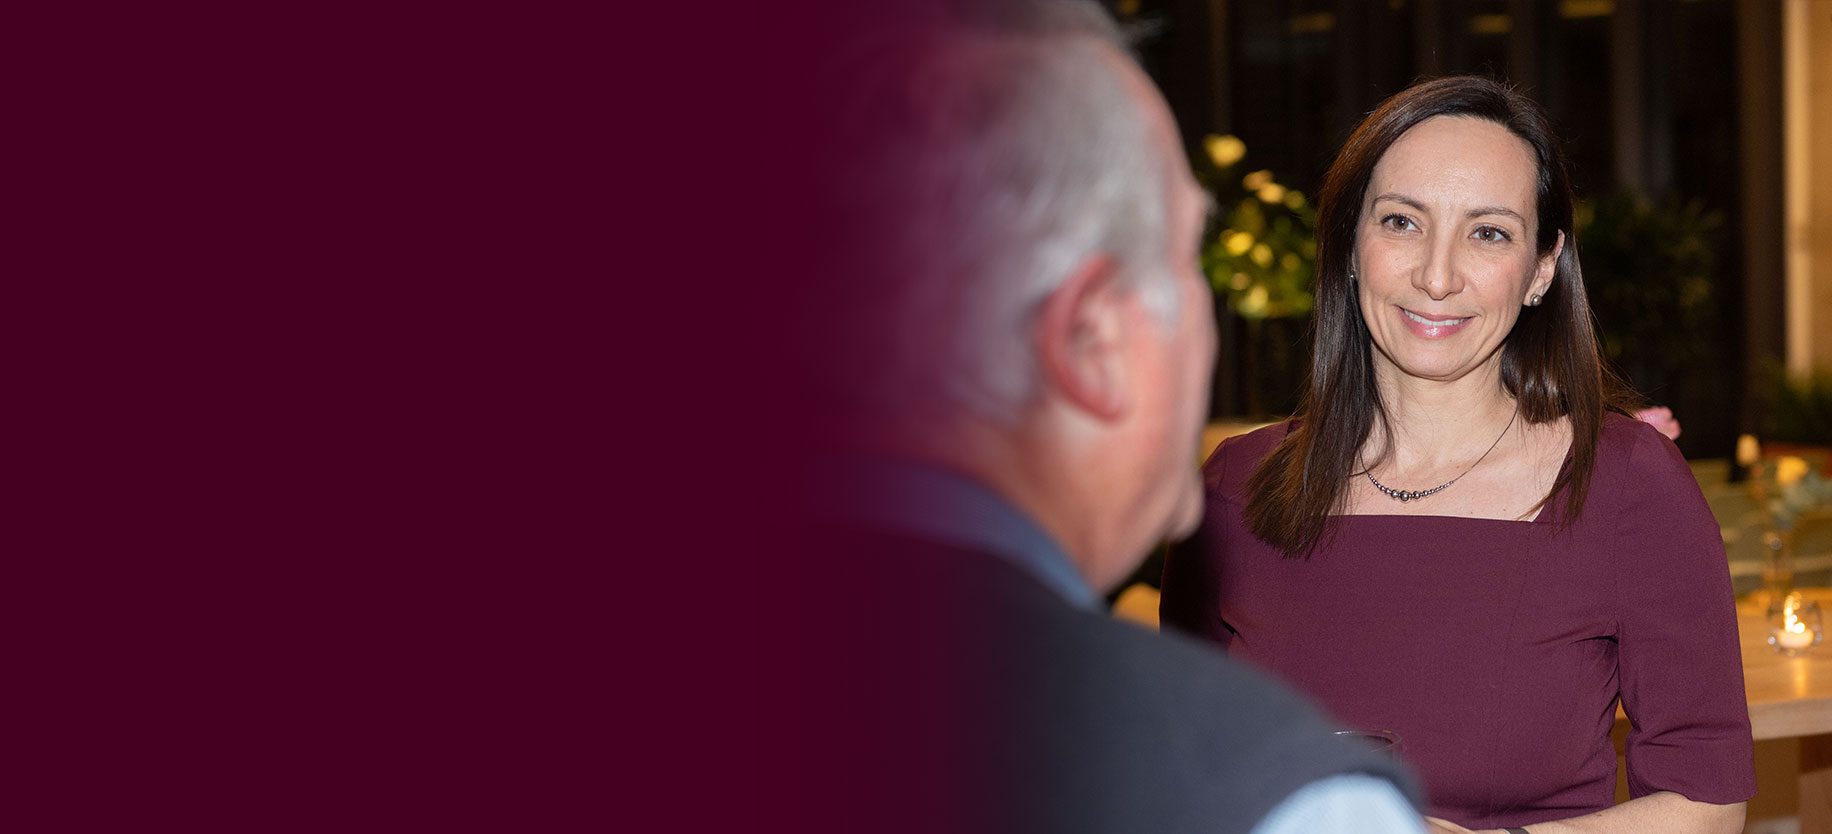 Julie Cordeiro in conversation with a client at a Burgundy event